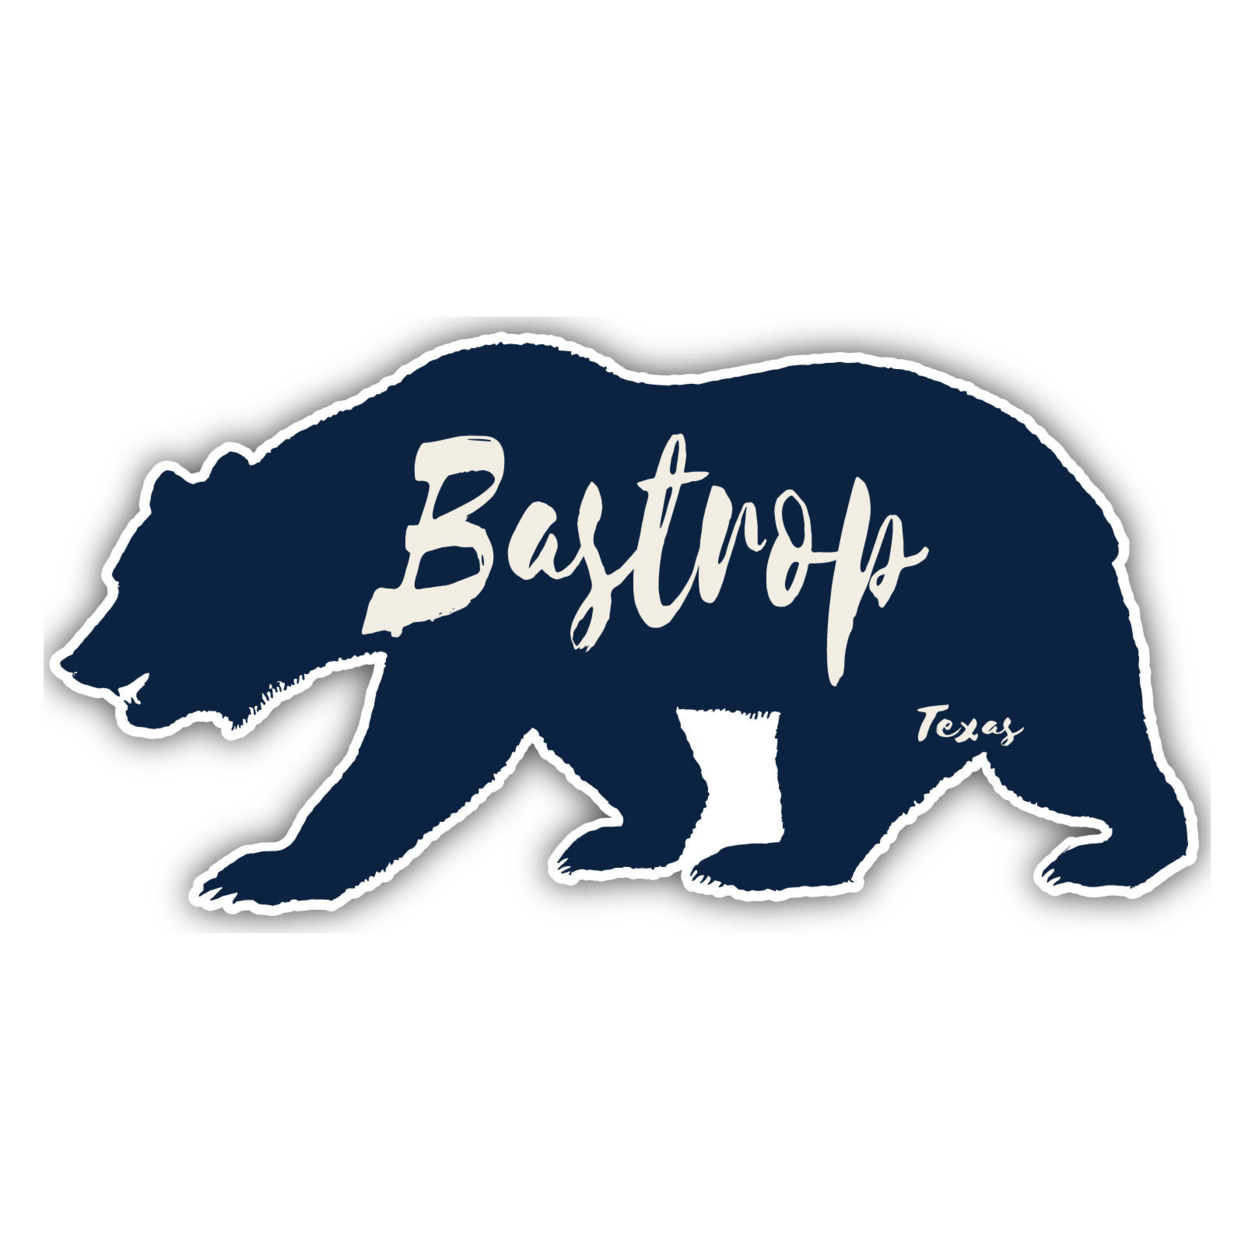 Bastrop Texas Souvenir Decorative Stickers (Choose Theme And Size) - 4-Pack, 6-Inch, Bear